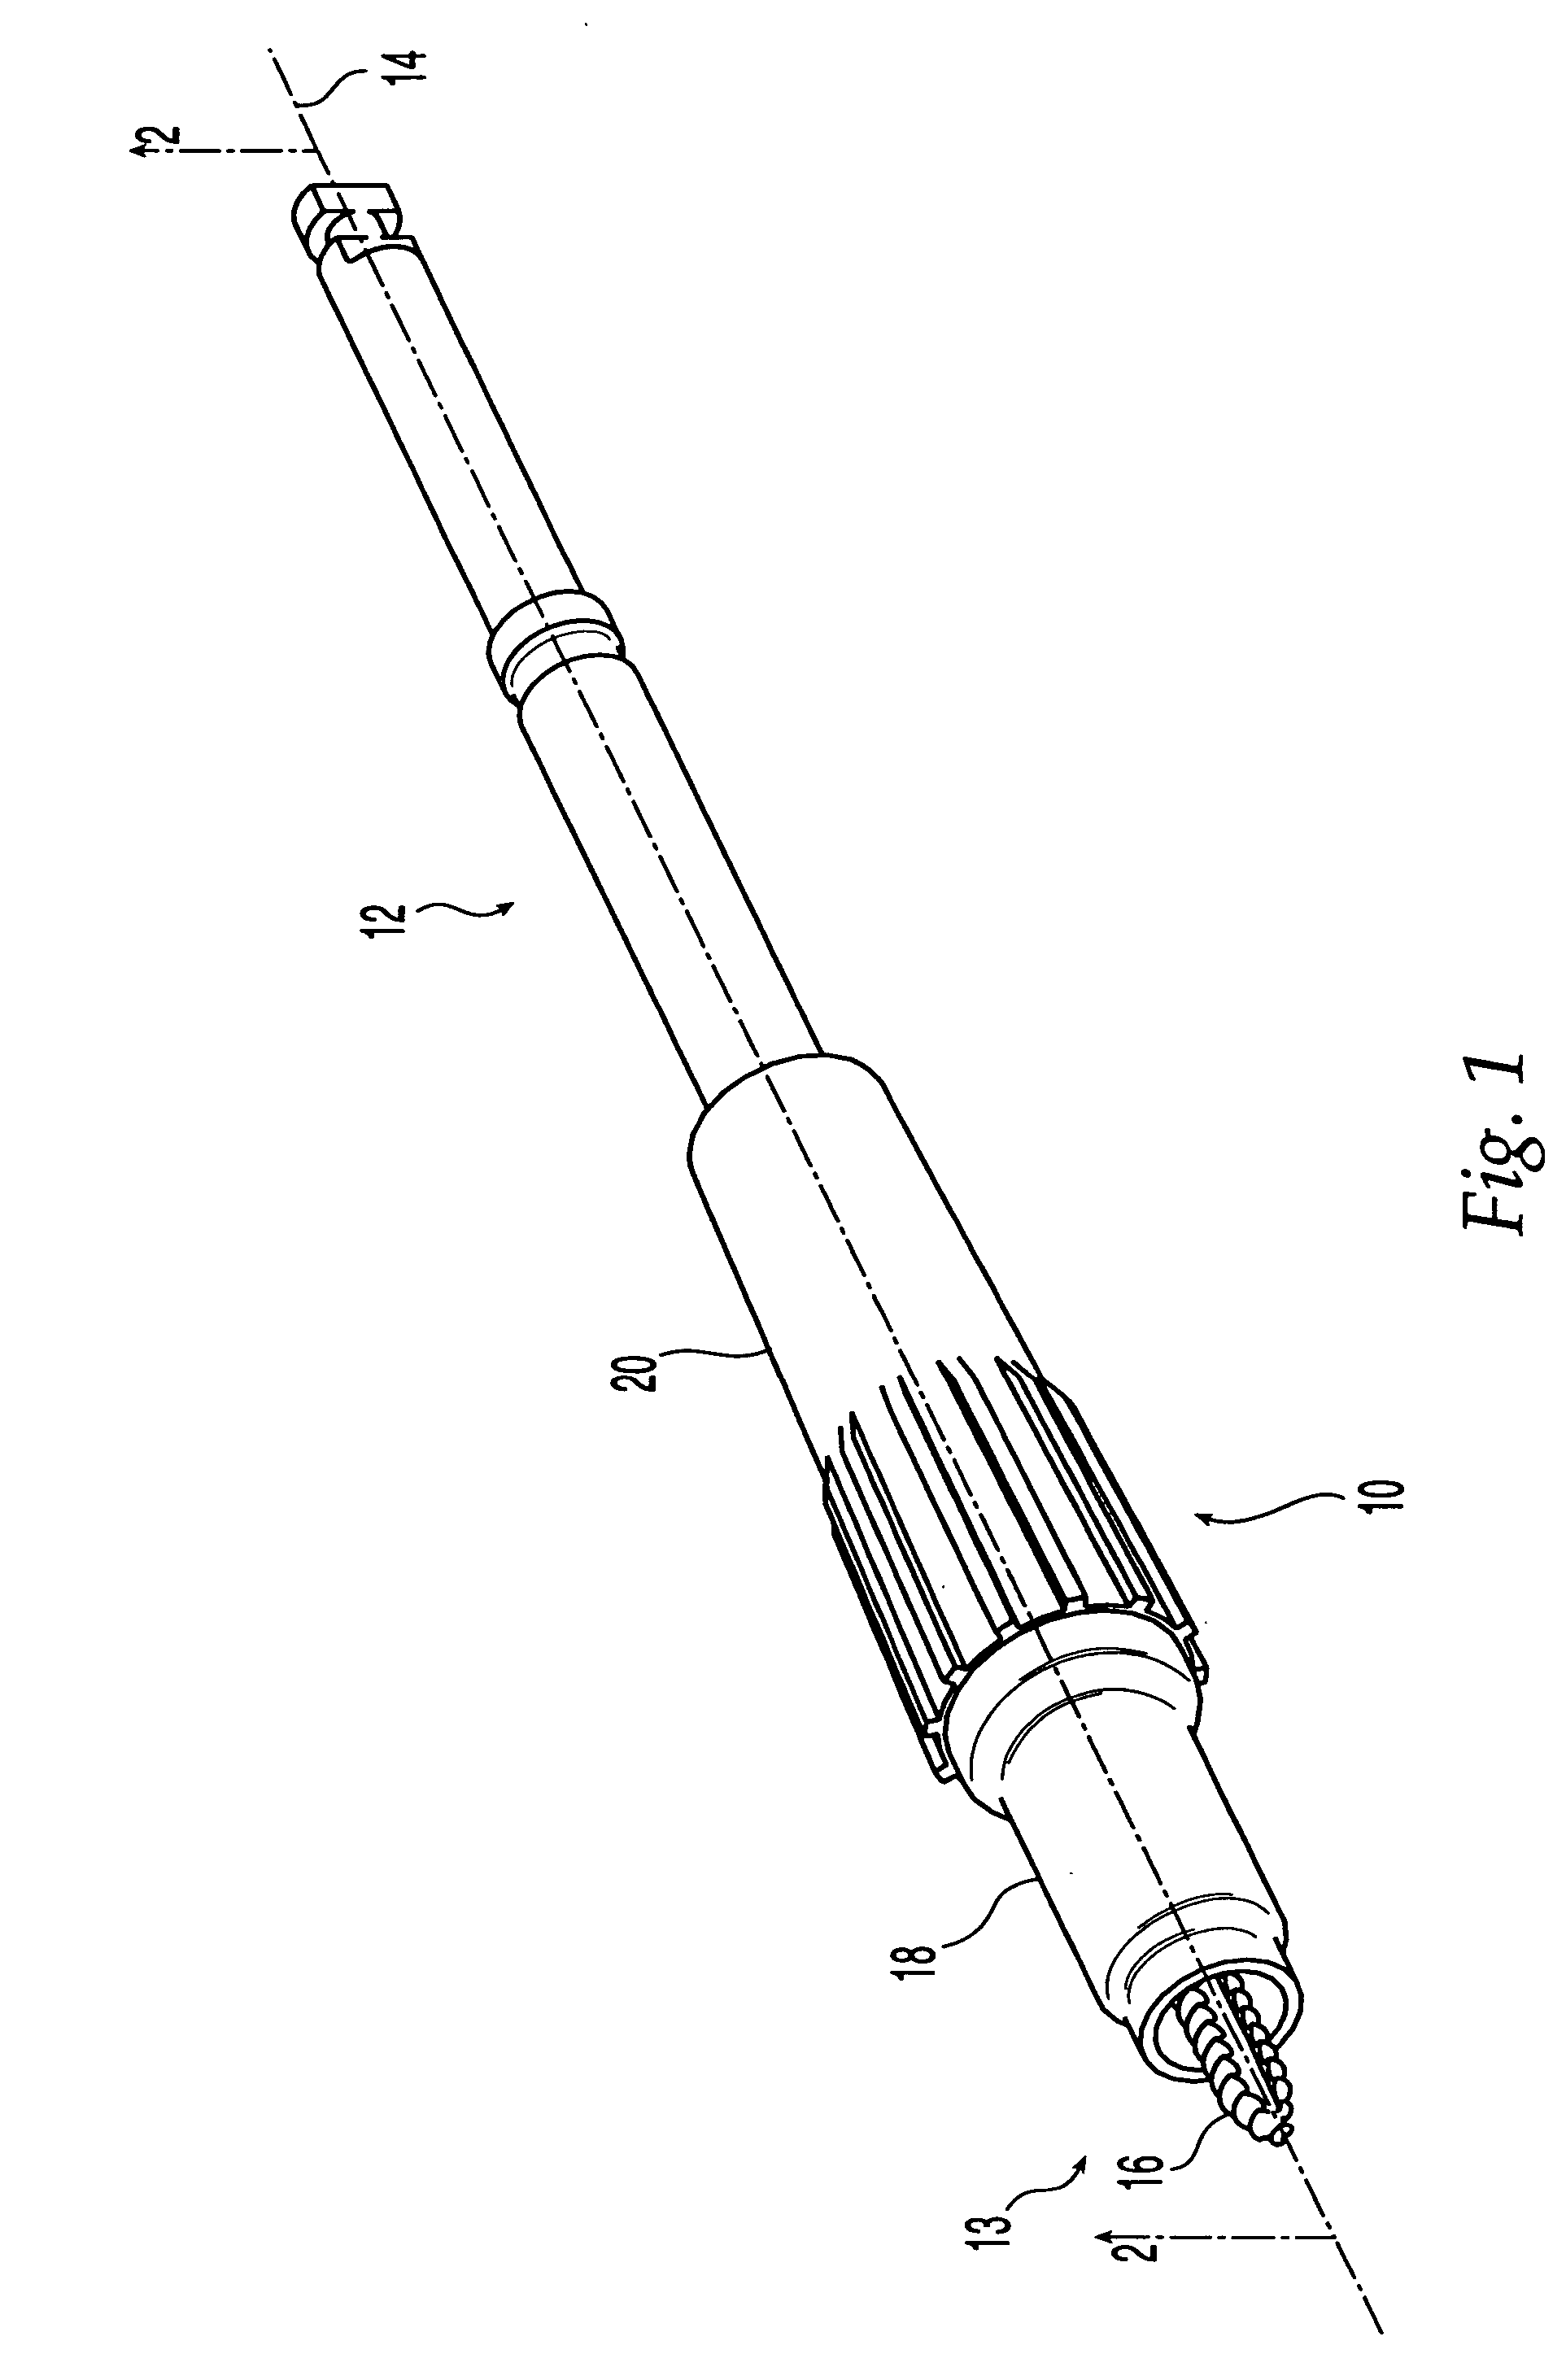 Adjustable length tap and method for drilling and tapping a bore in bone